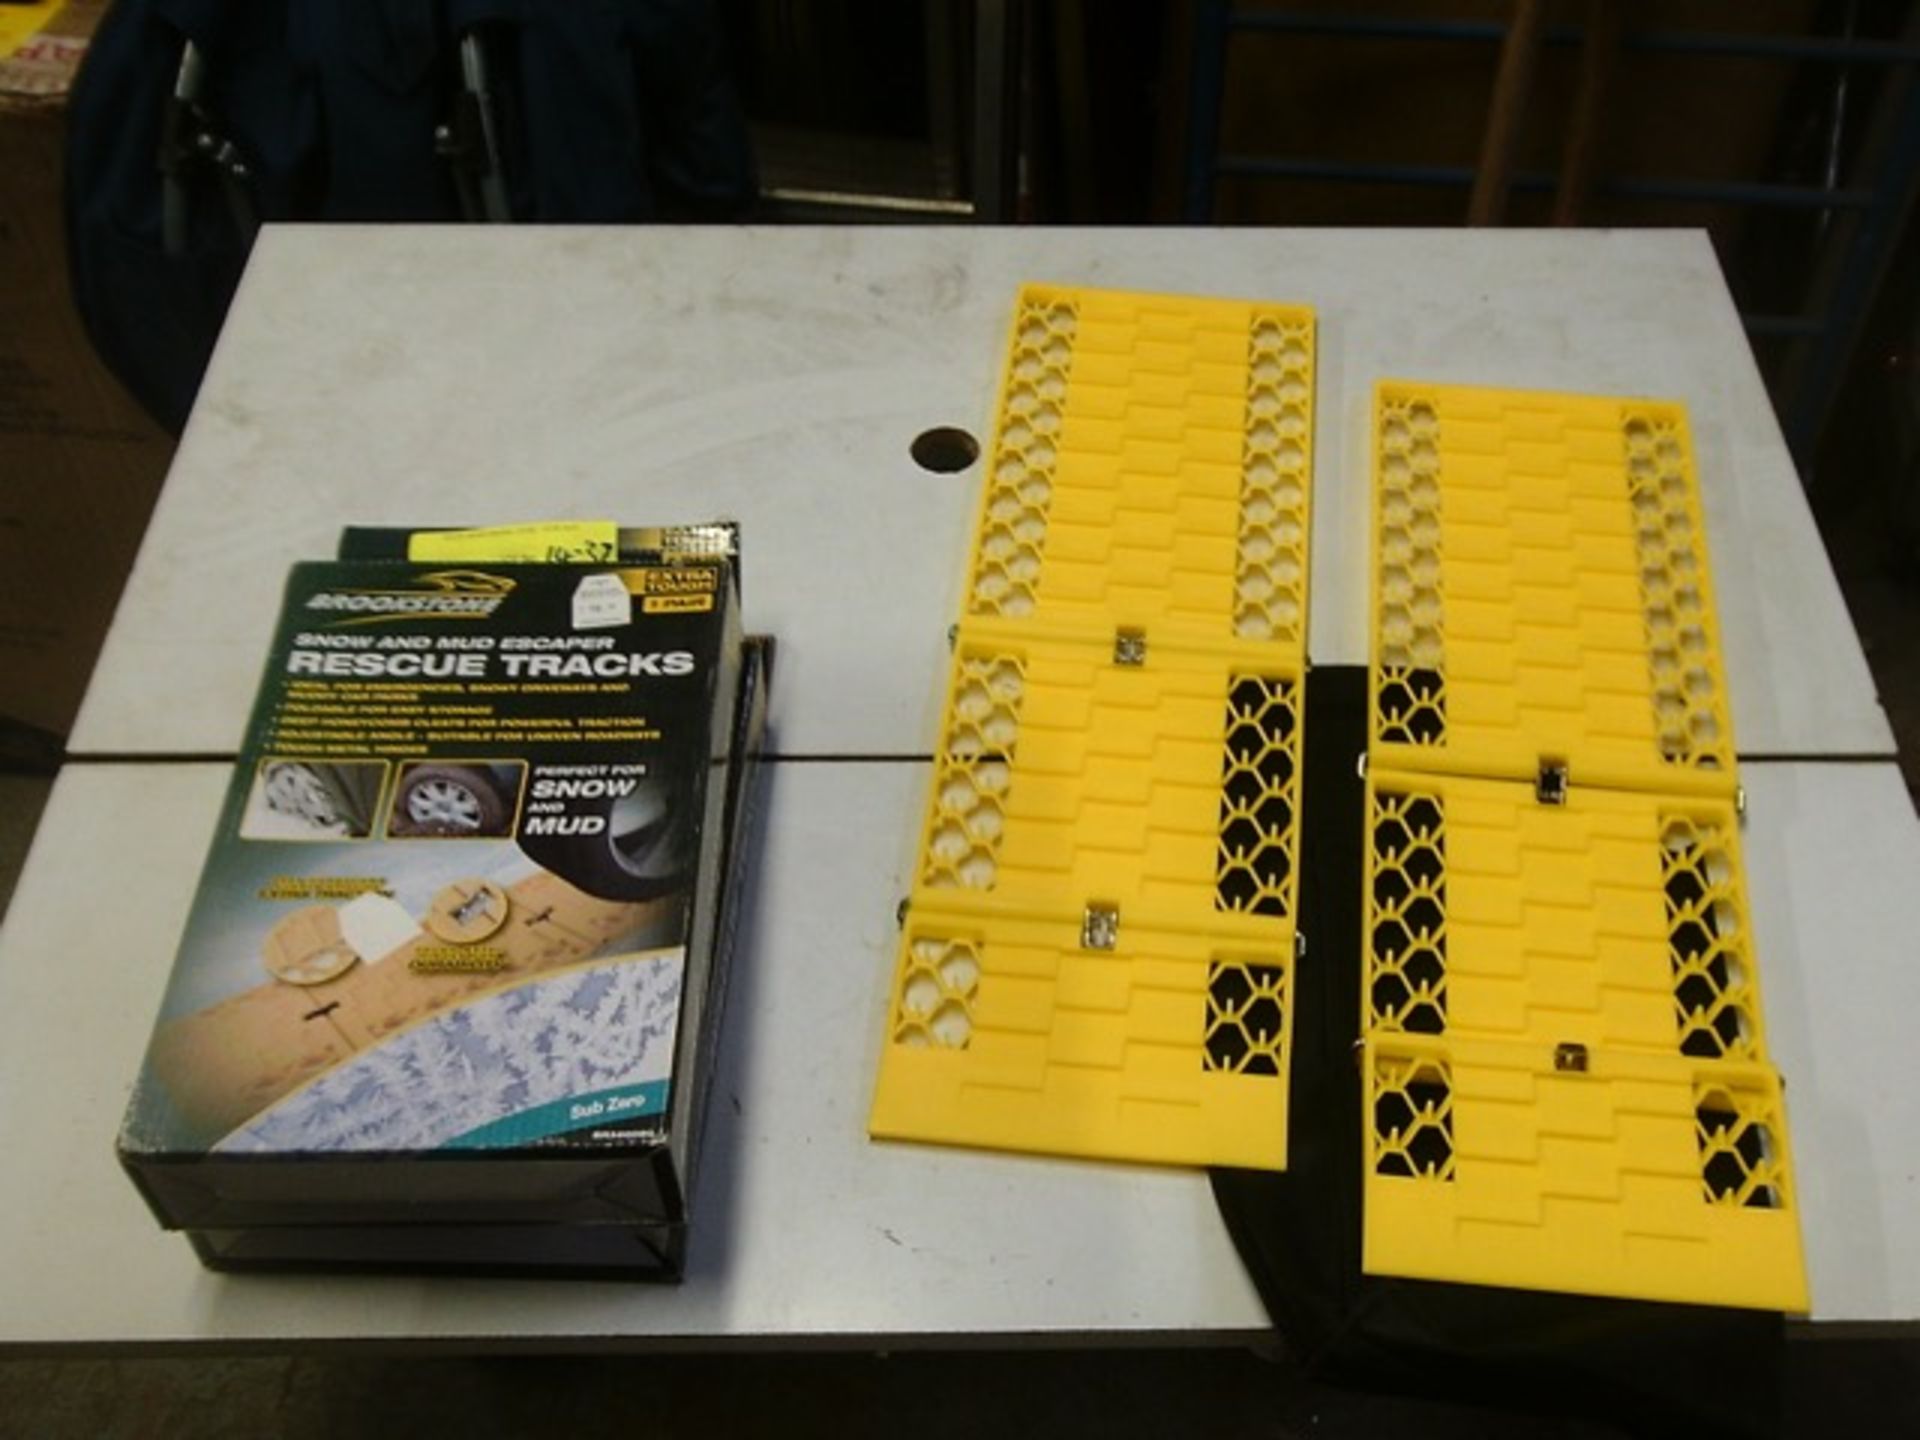 10pcs - Brand new Brookstone Mud / snow rescue tracks - rrp 19.99 ( 10 brand new sets in this lot )